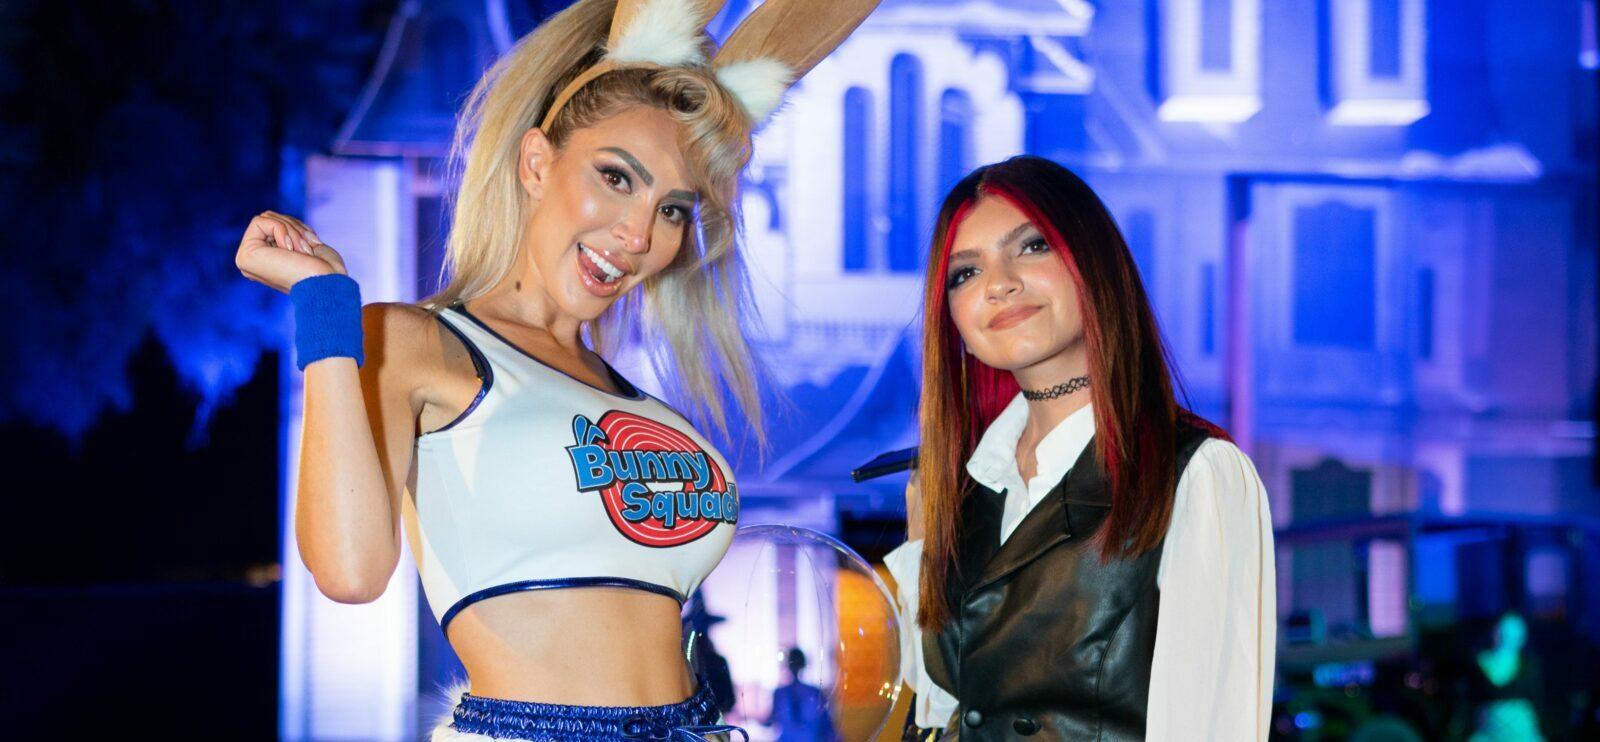 Farrah Abraham visits the Haunt O apos Ween LA An Immersive Halloween Experience at the Westfield Topanga with her daughter Sophia